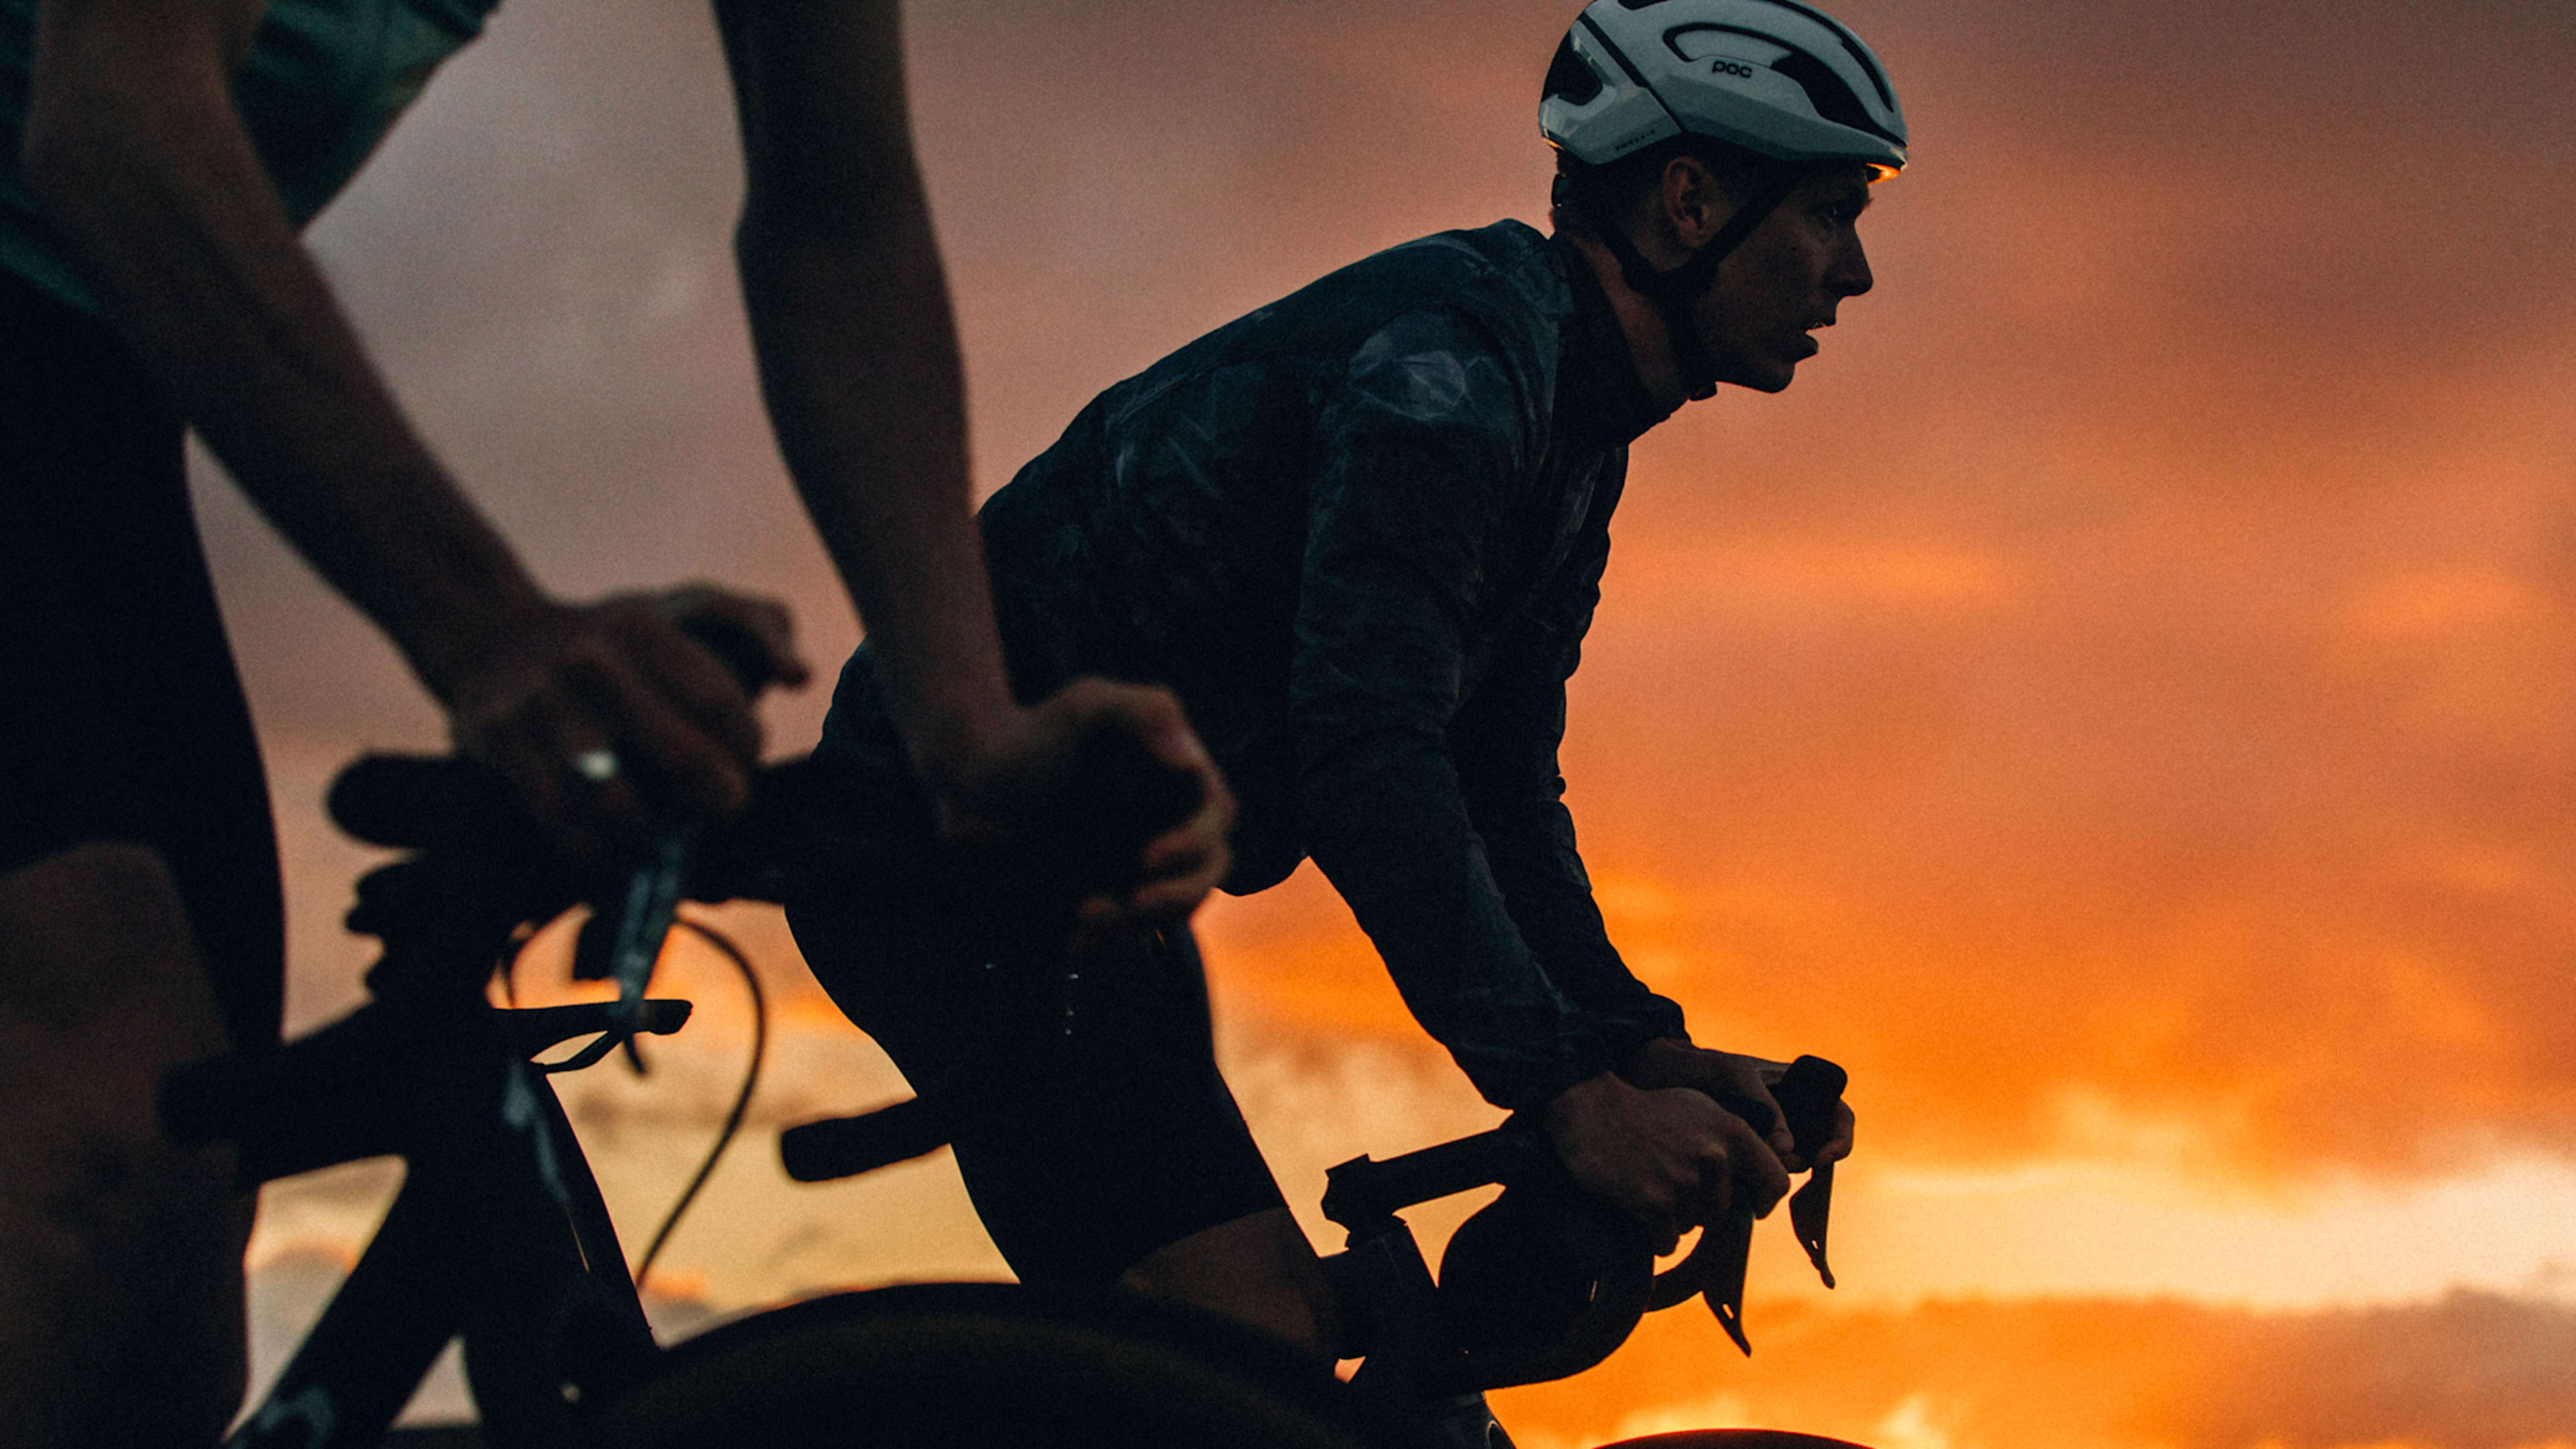 The World's Finest Clothing and Accessories. | Rapha